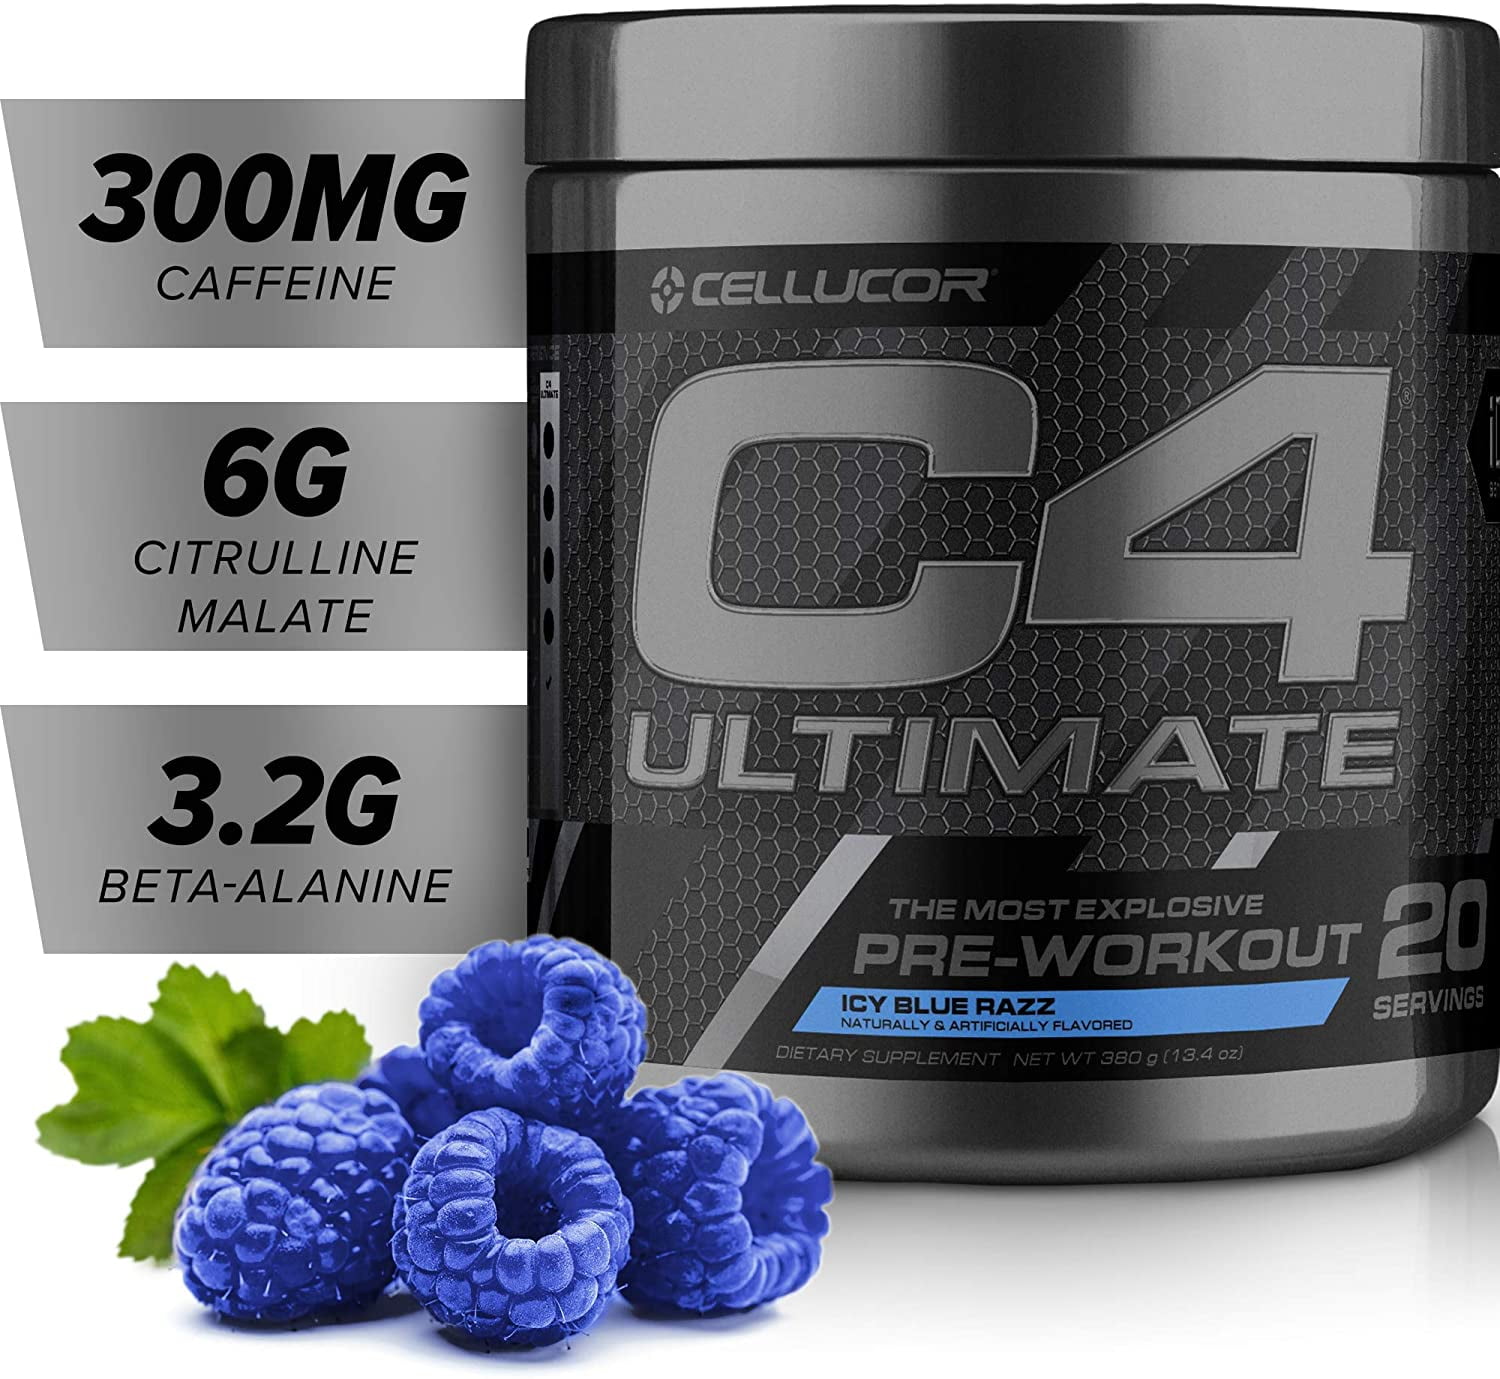  Best Pre Workout Supplement Canada for Burn Fat fast